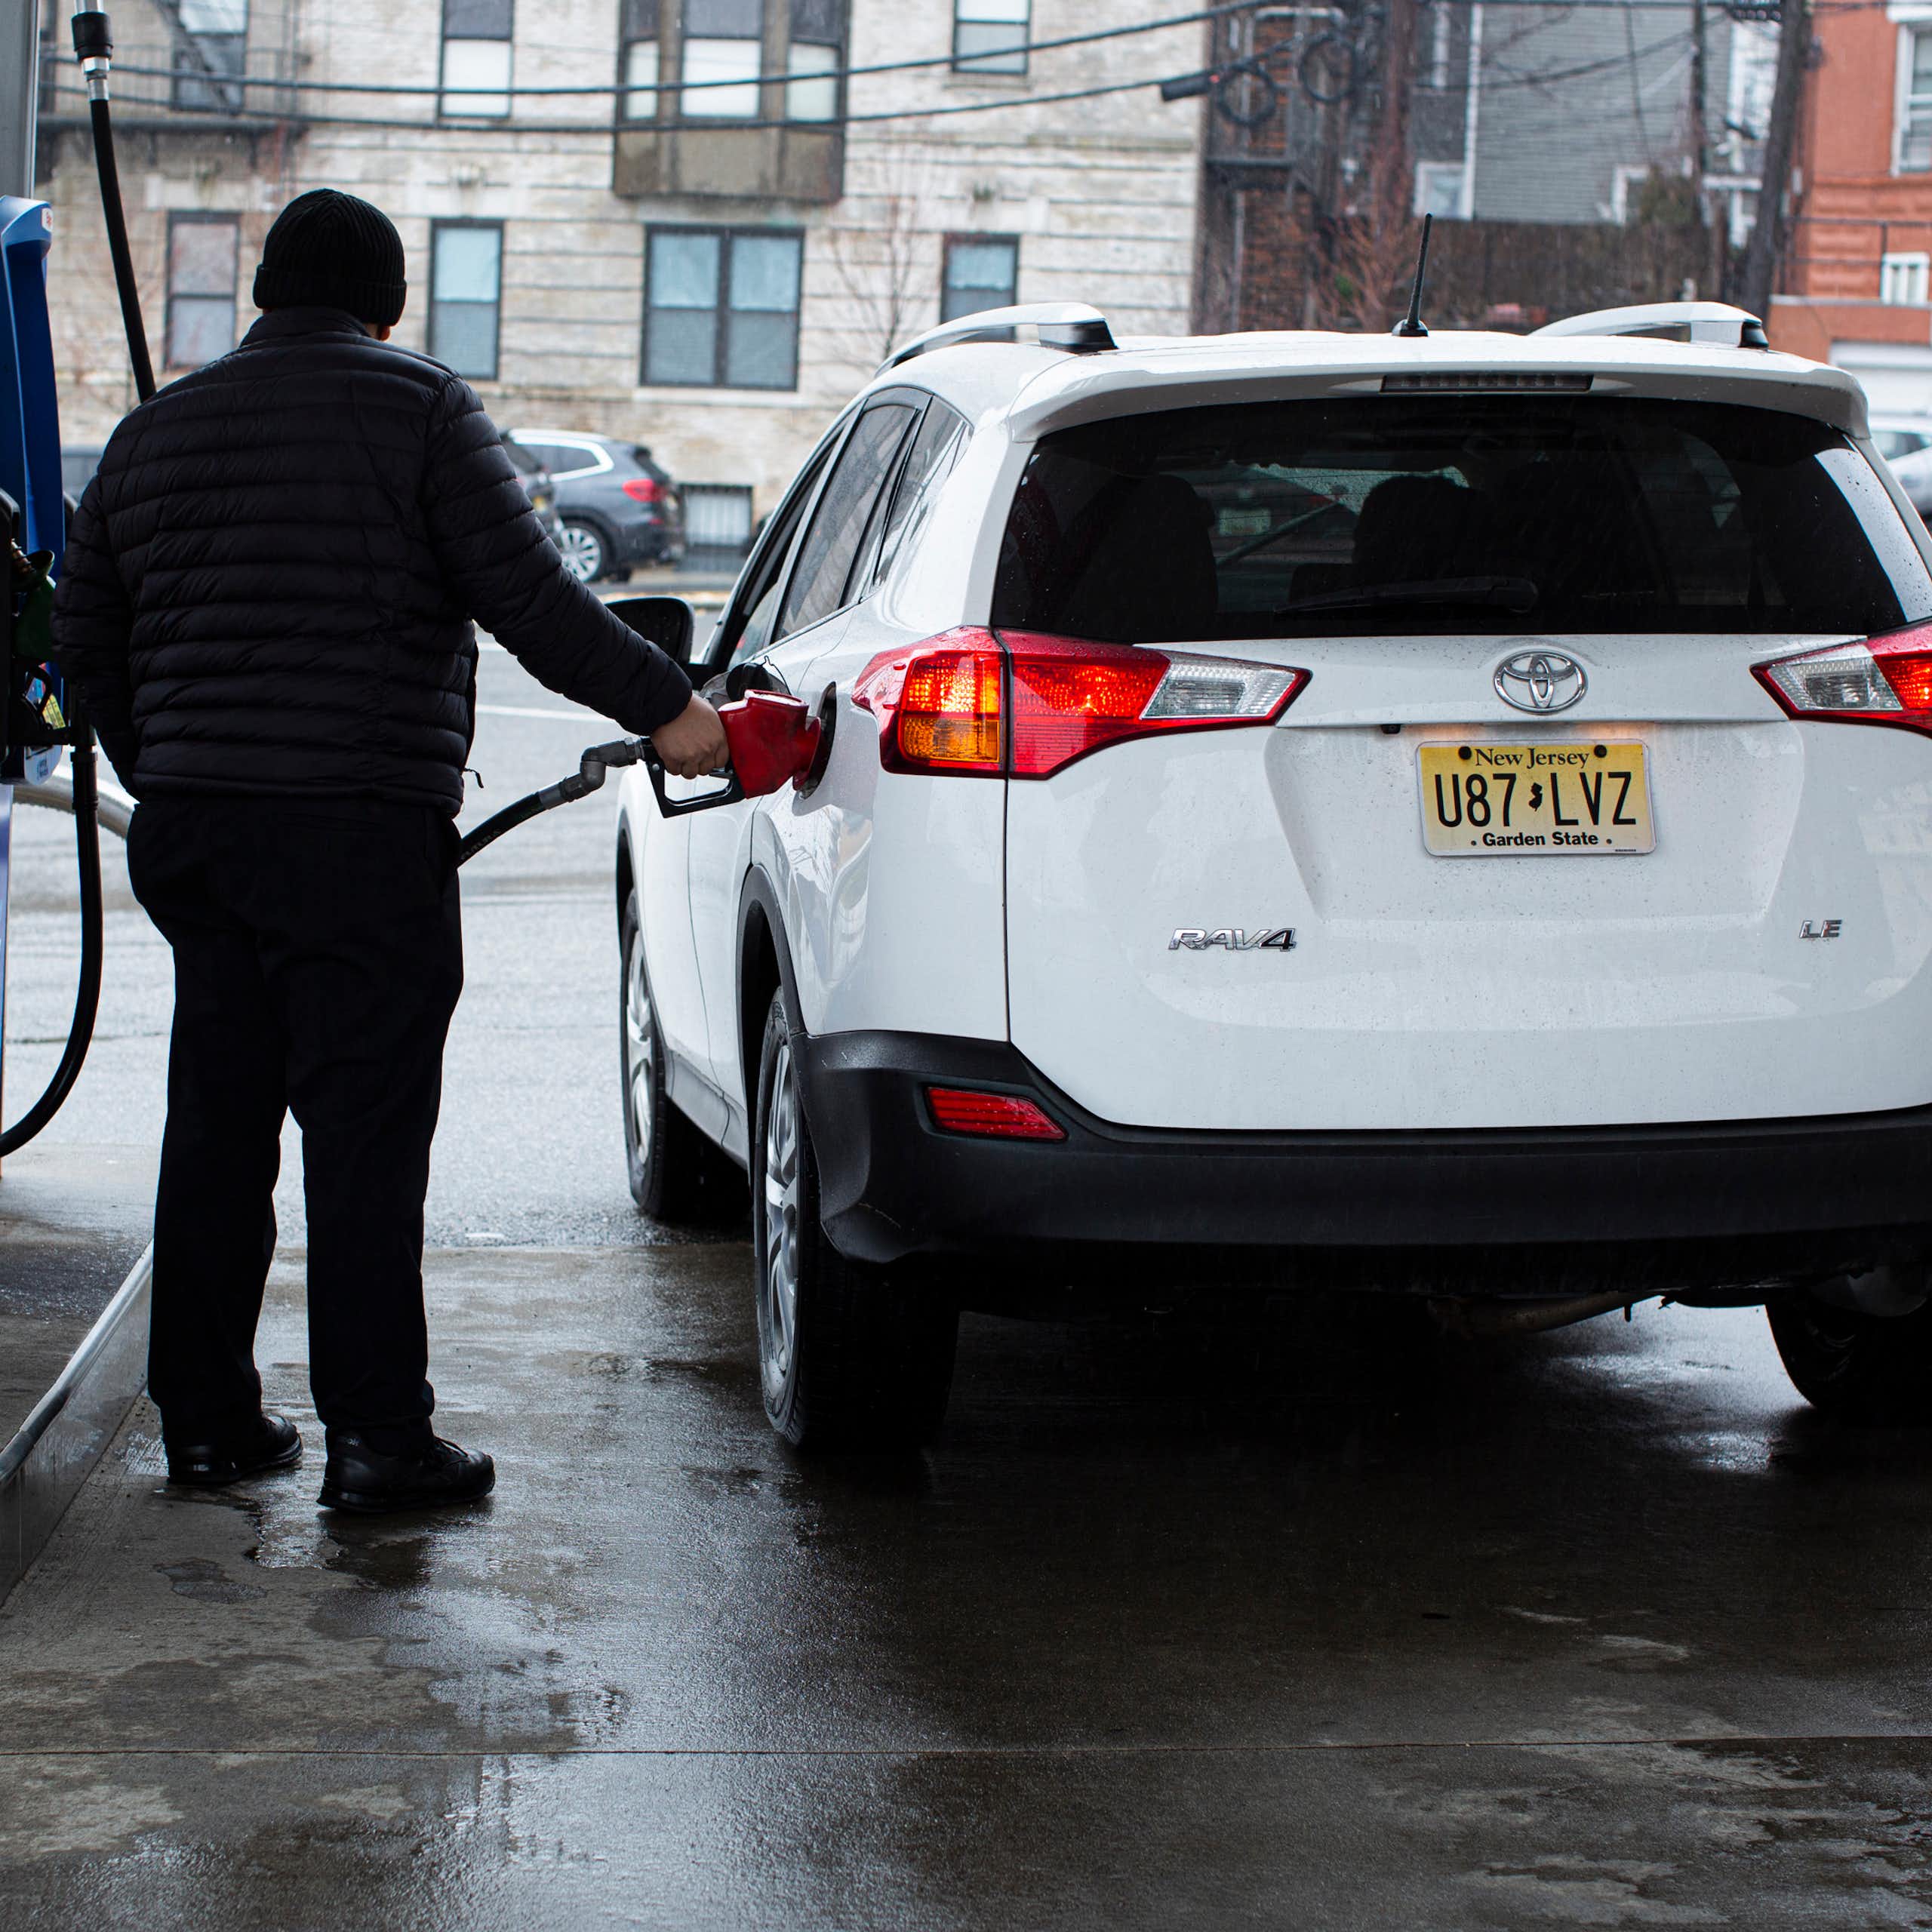 A gas station attendant refuels a car at a gas station in Weehawken, New Jersey, in March 2022.